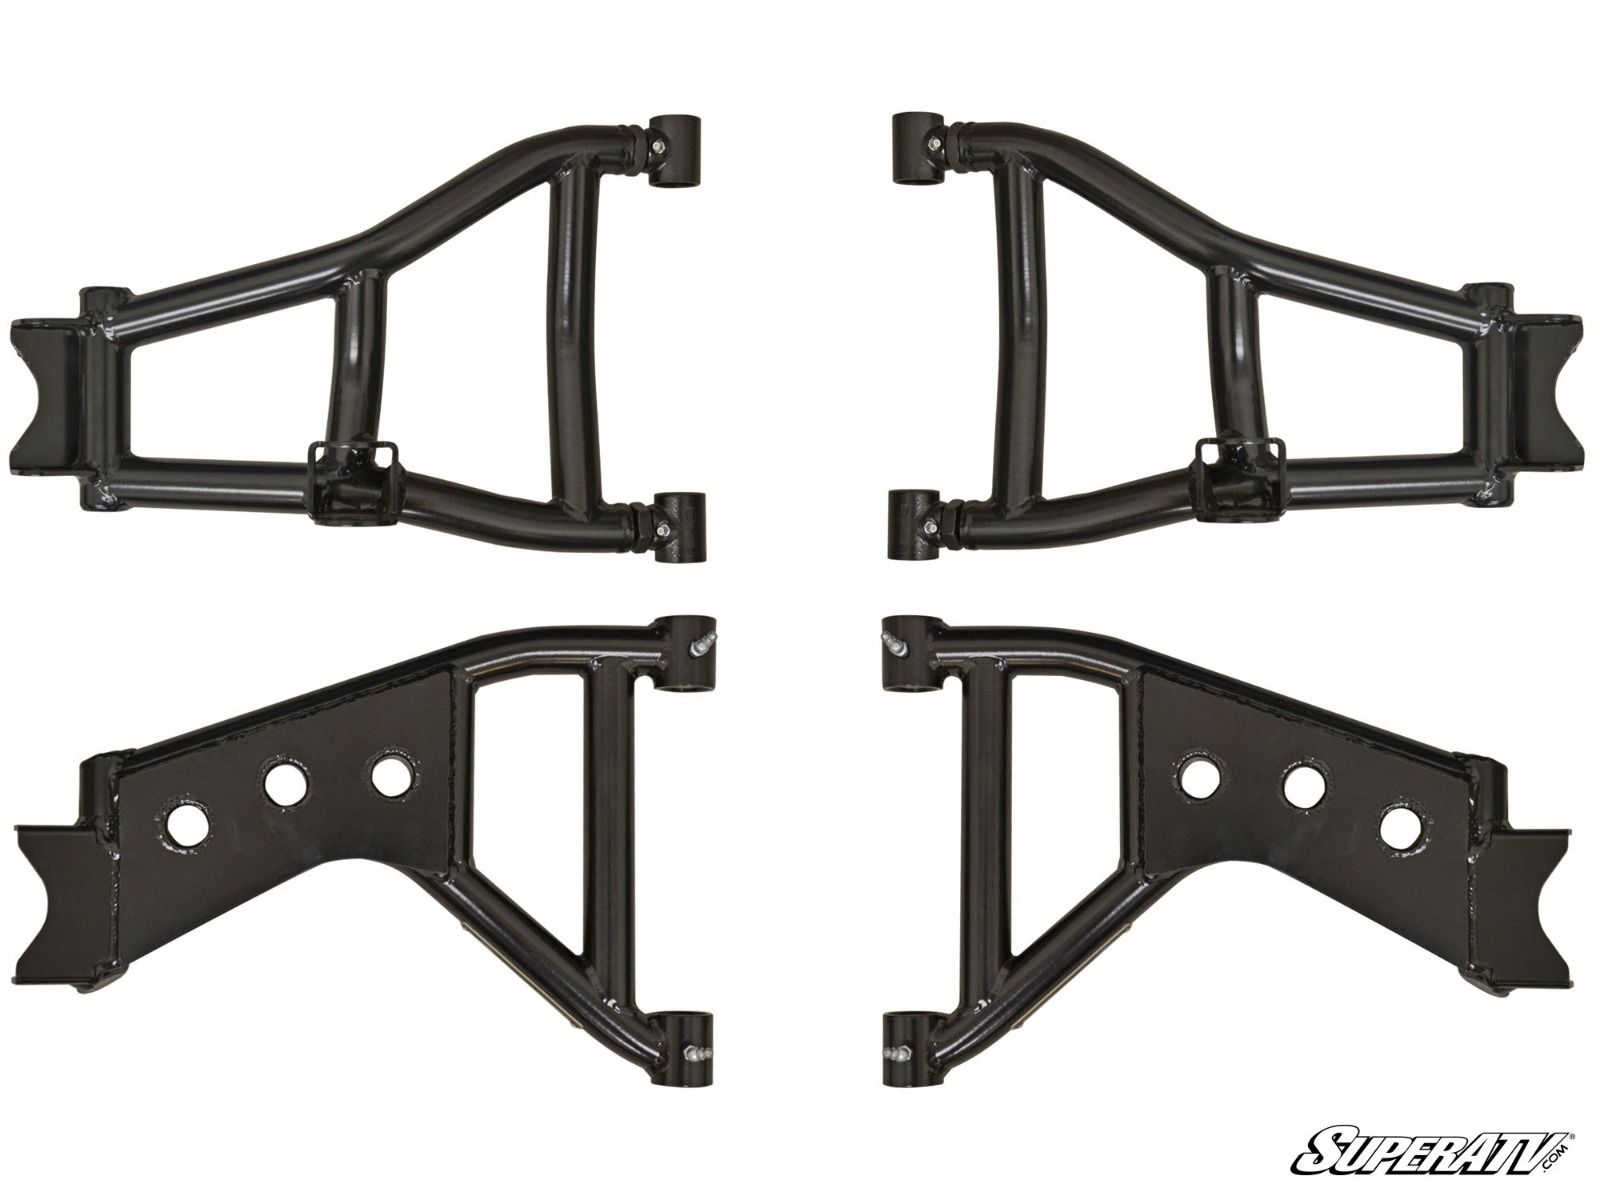 High Clearance 1.5" Rear Offset Rear A-Arms Green - For 12-21 Kawasaki Teryx - Click Image to Close